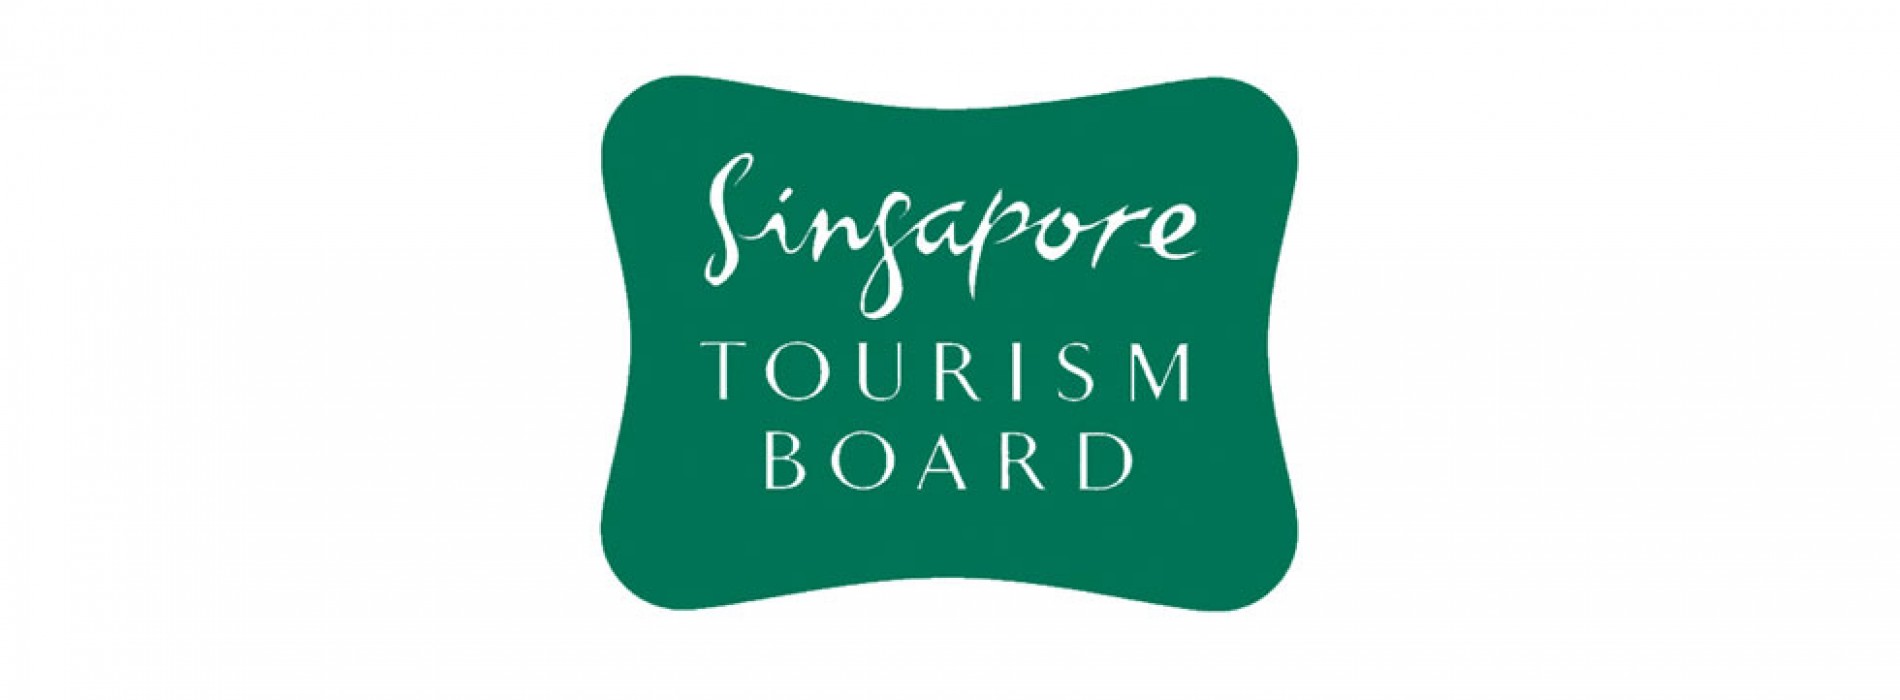 Singapore welcomes 1 million tourist arrivals from India